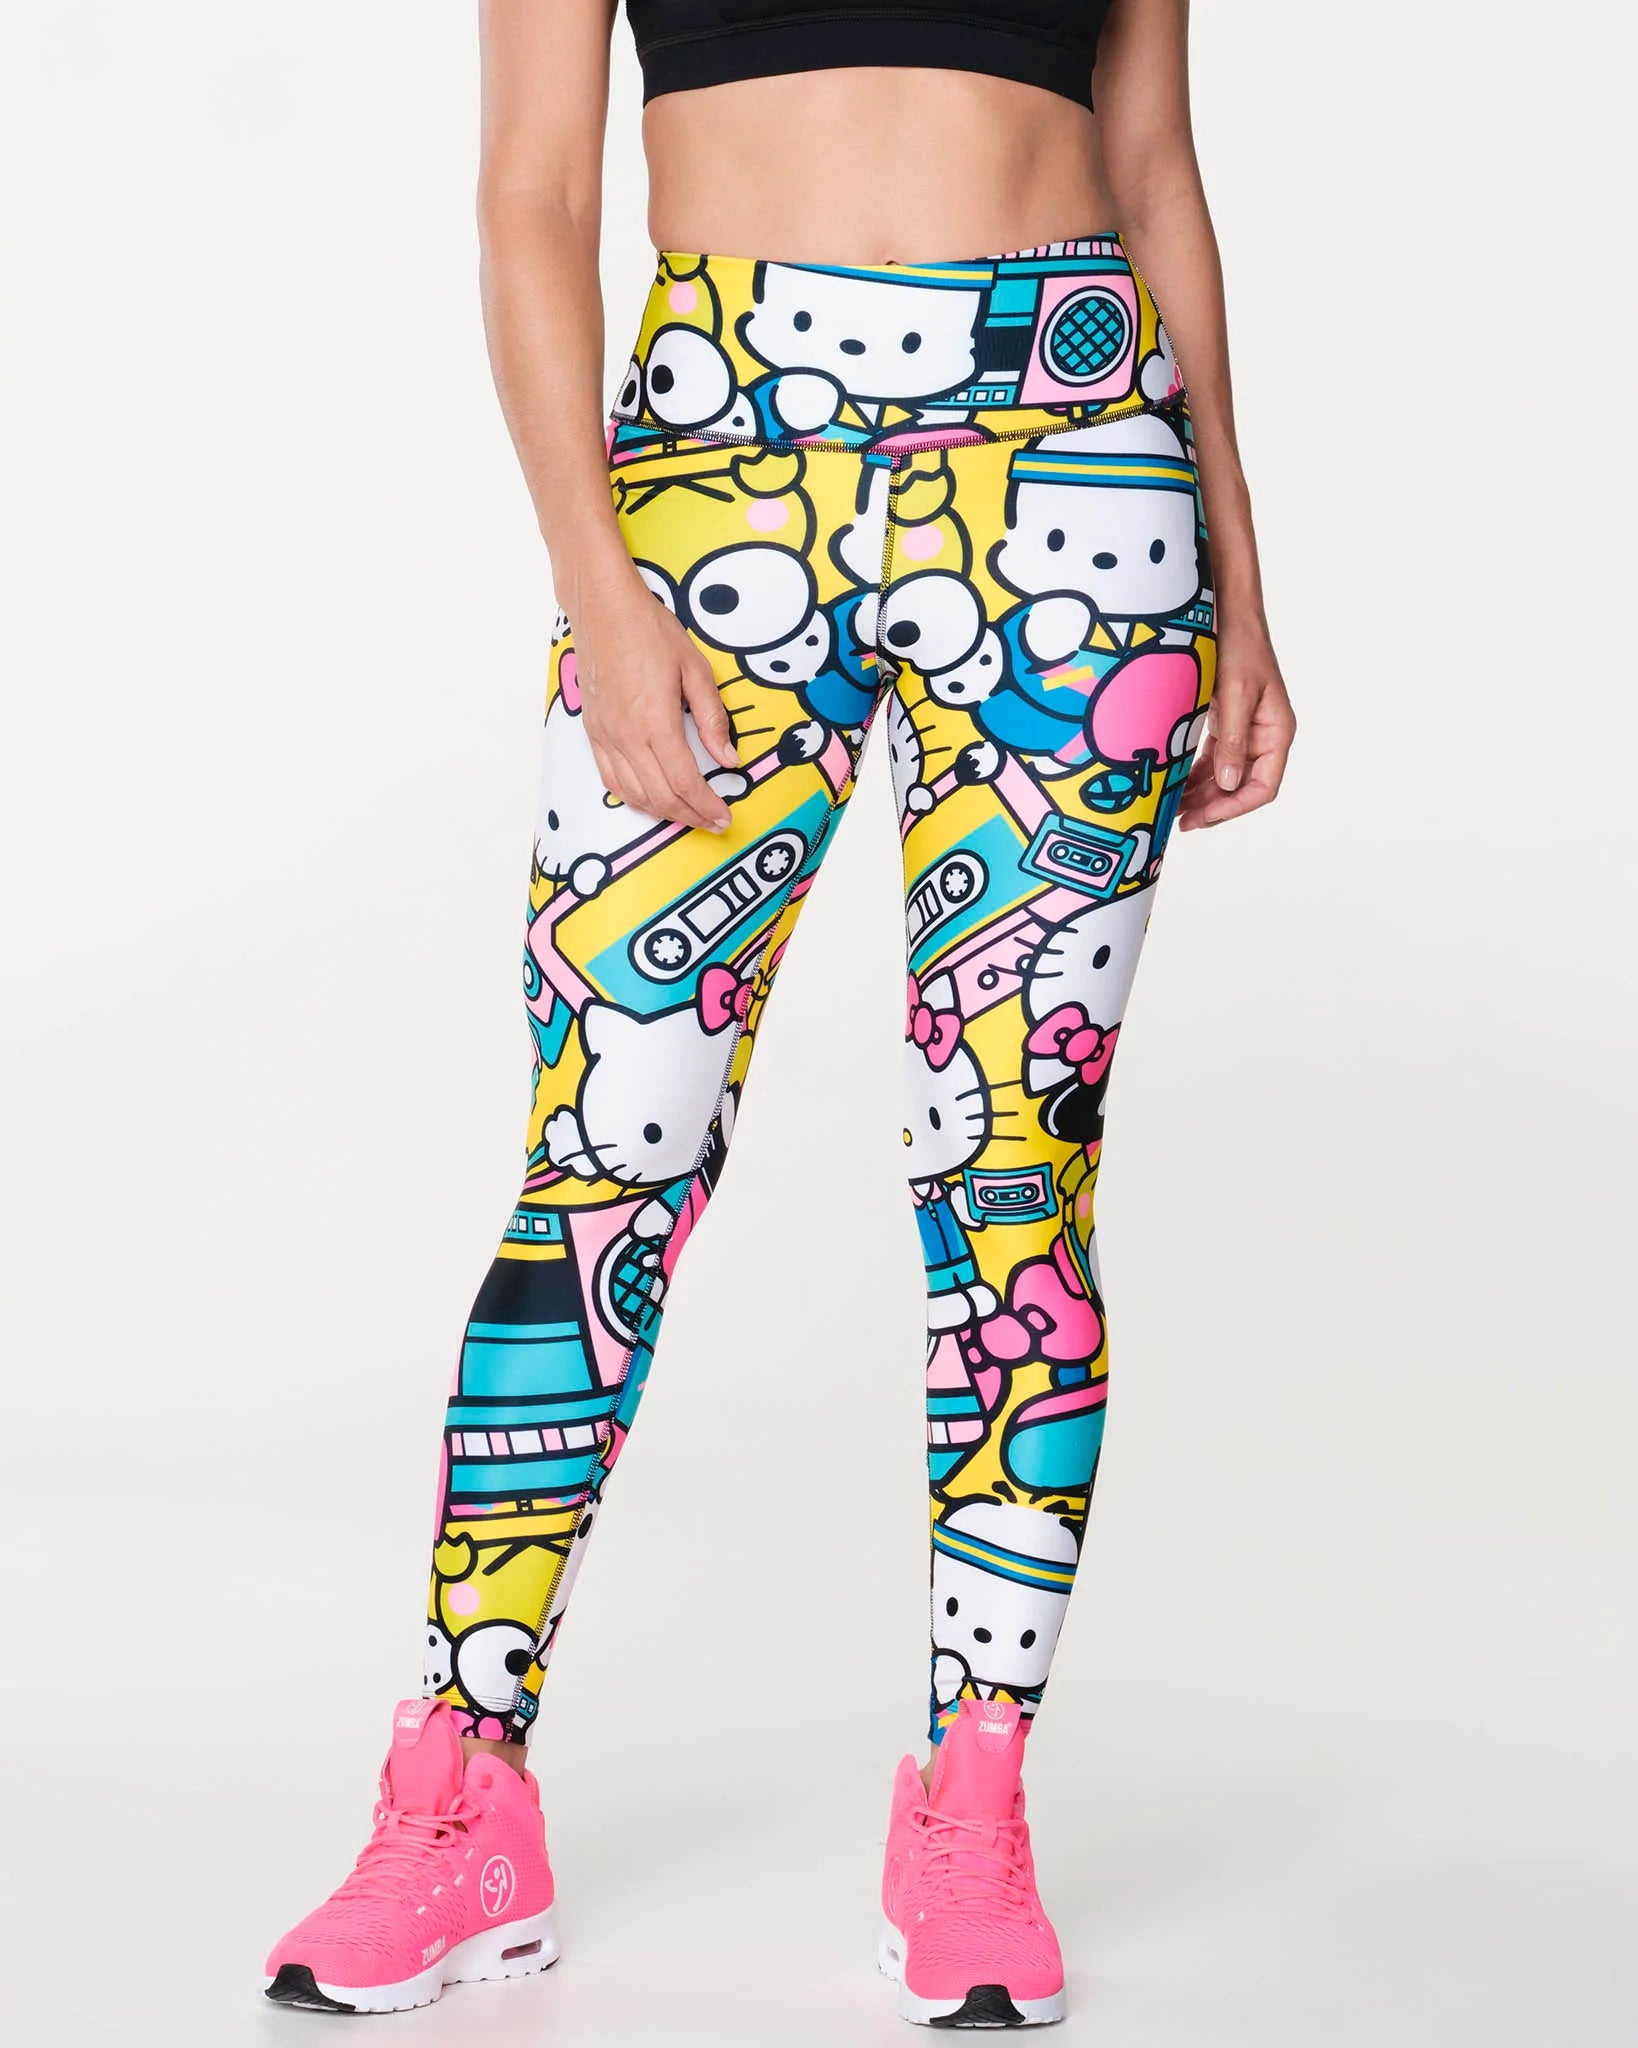 HELLO KITTY AND FRIENDS, SHEIN Plus Size & Letter Print Leggings for Sale  New Zealand, New Collection Online